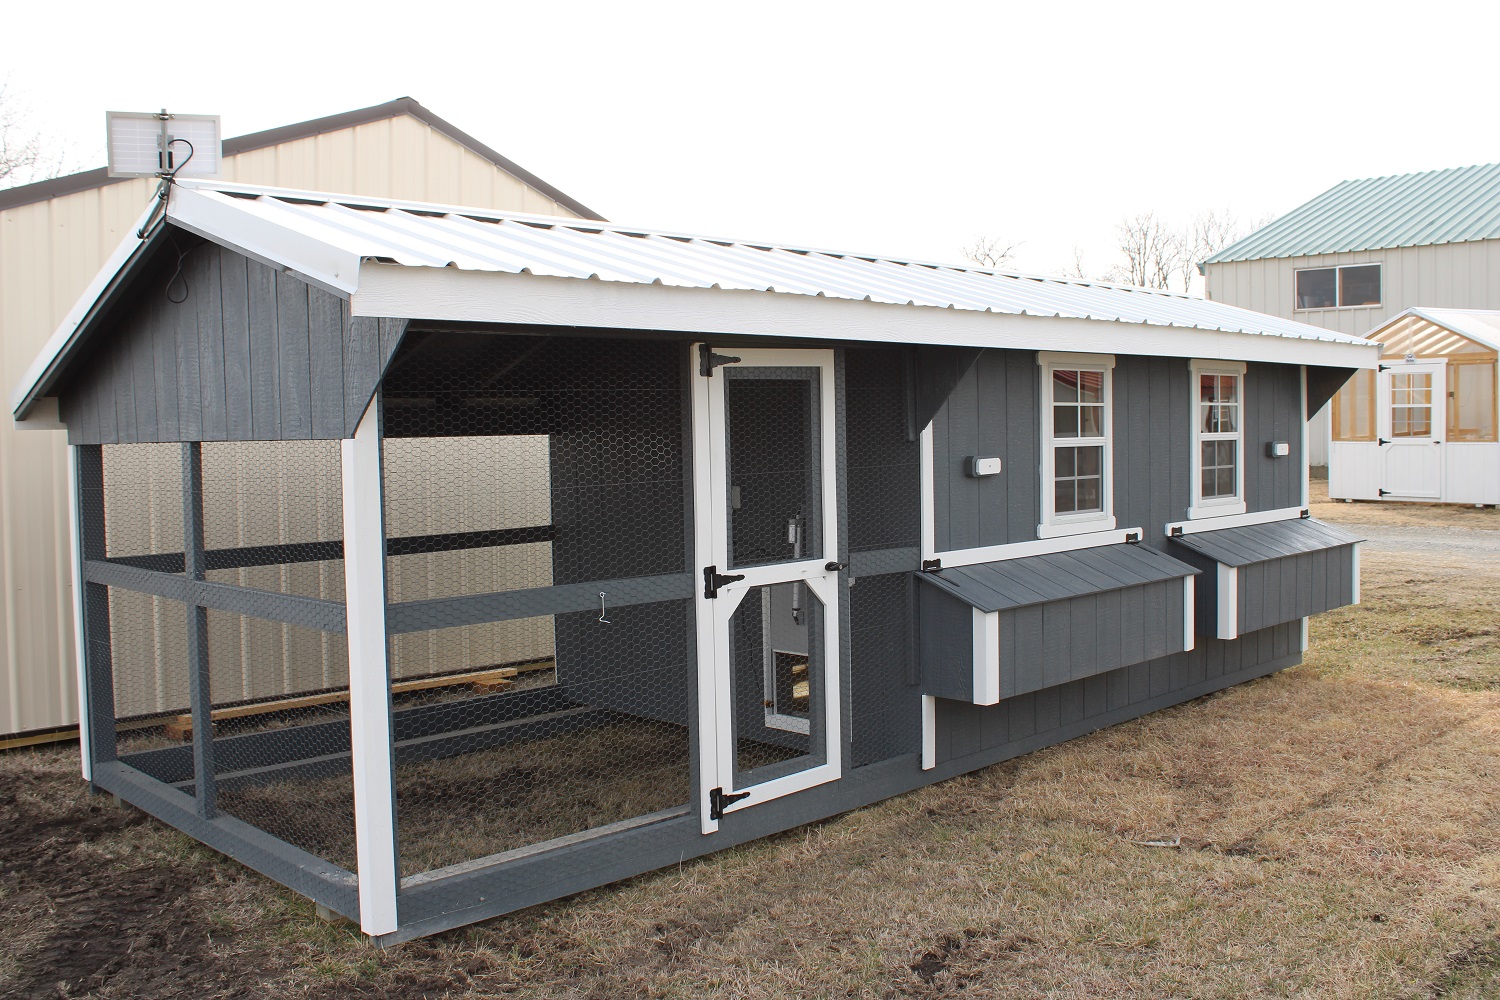 Cook Shed Ideas for sale - Projective Portable Buildings